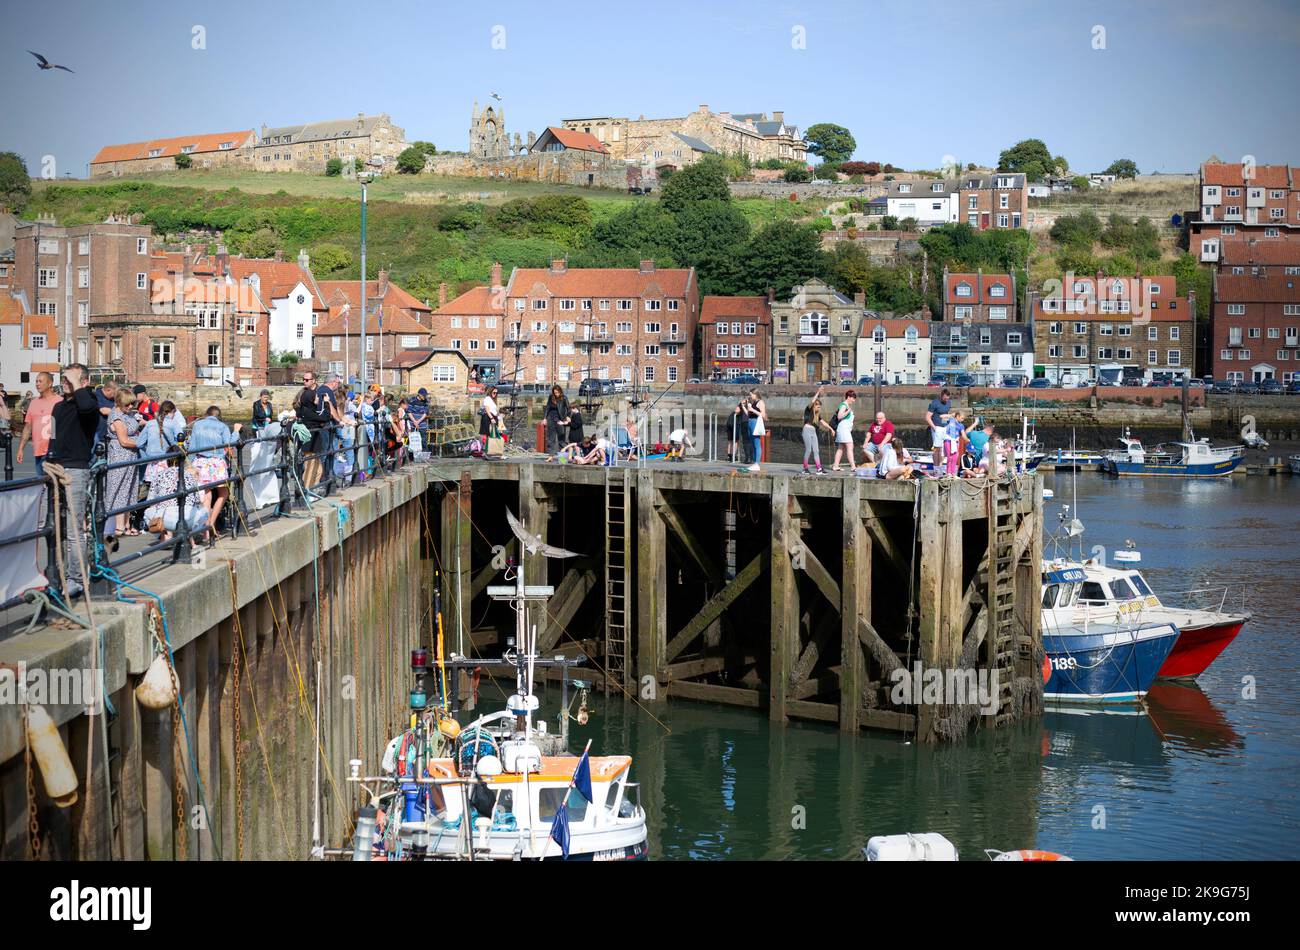 Pdeople “crabbing” in the seaside town of Whitby in North Yorkshire in Northern England. Stock Photo